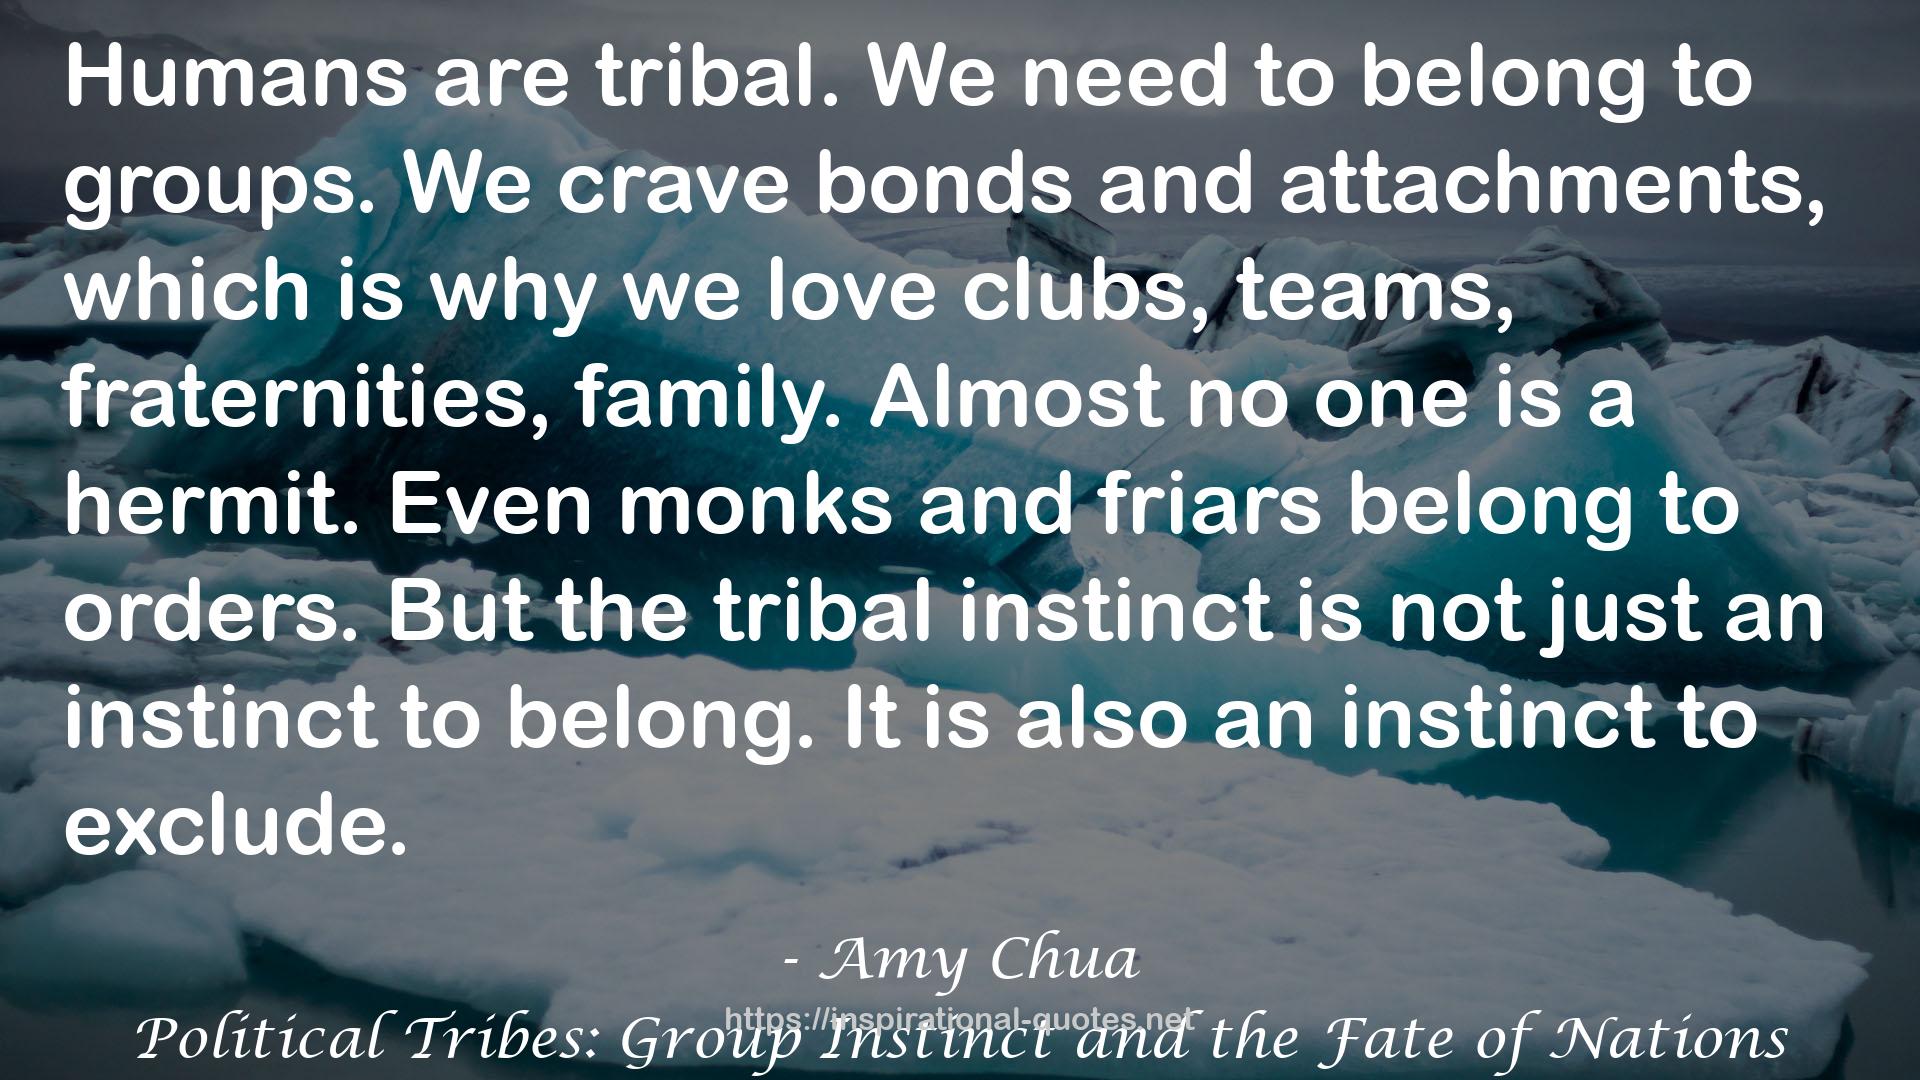 Political Tribes: Group Instinct and the Fate of Nations QUOTES